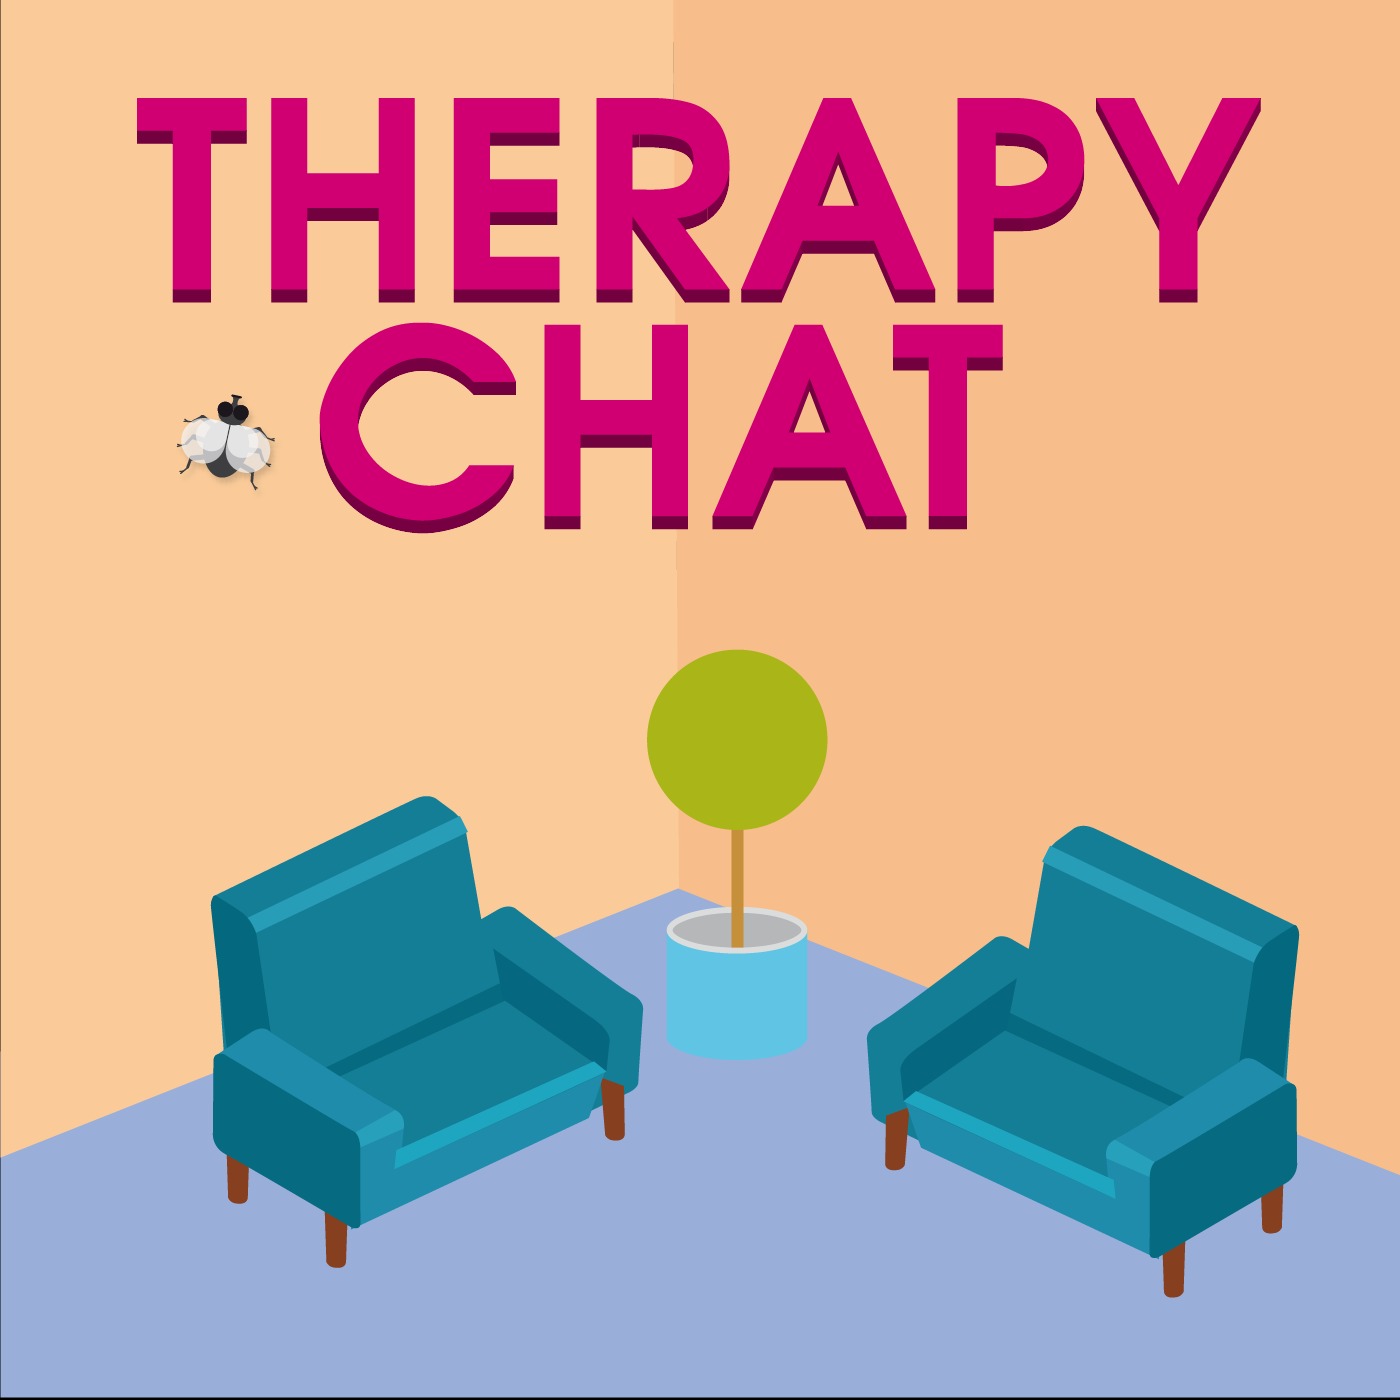 50: Therapists Share Their Favorite Self Care Tips